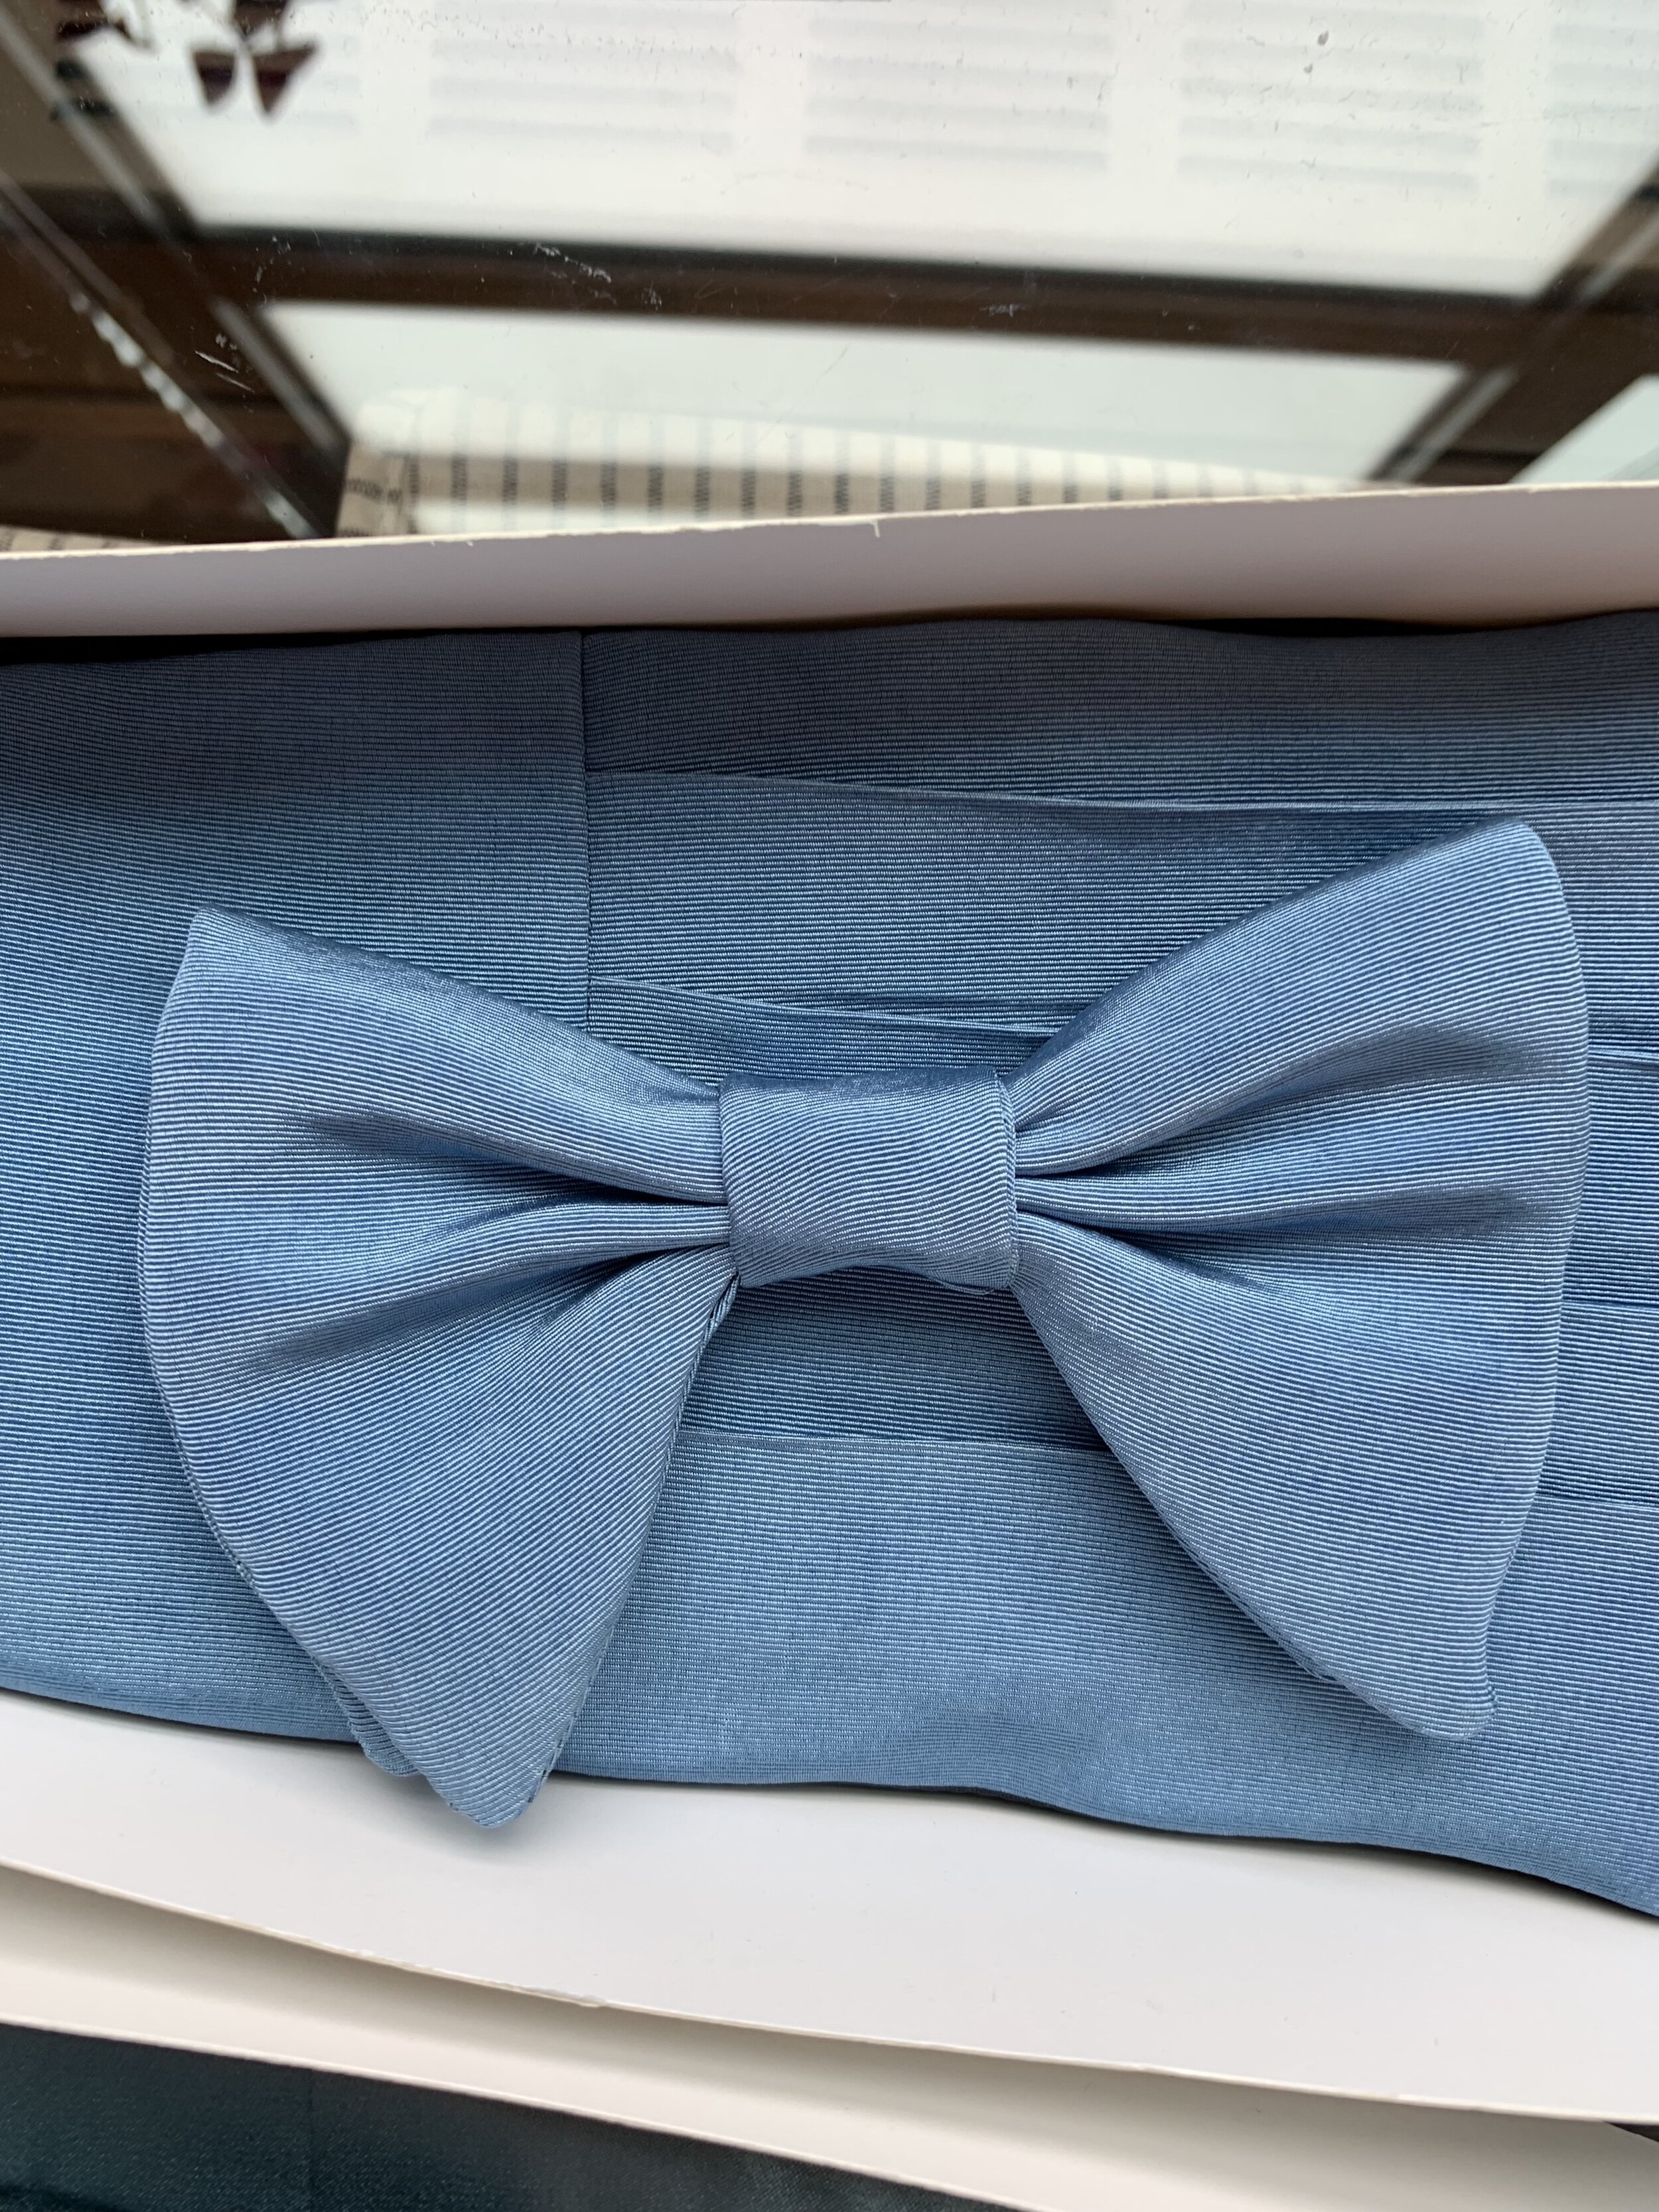 We also made custom silk faille bow ties with matching cummerbunds for the groom + groomsmen